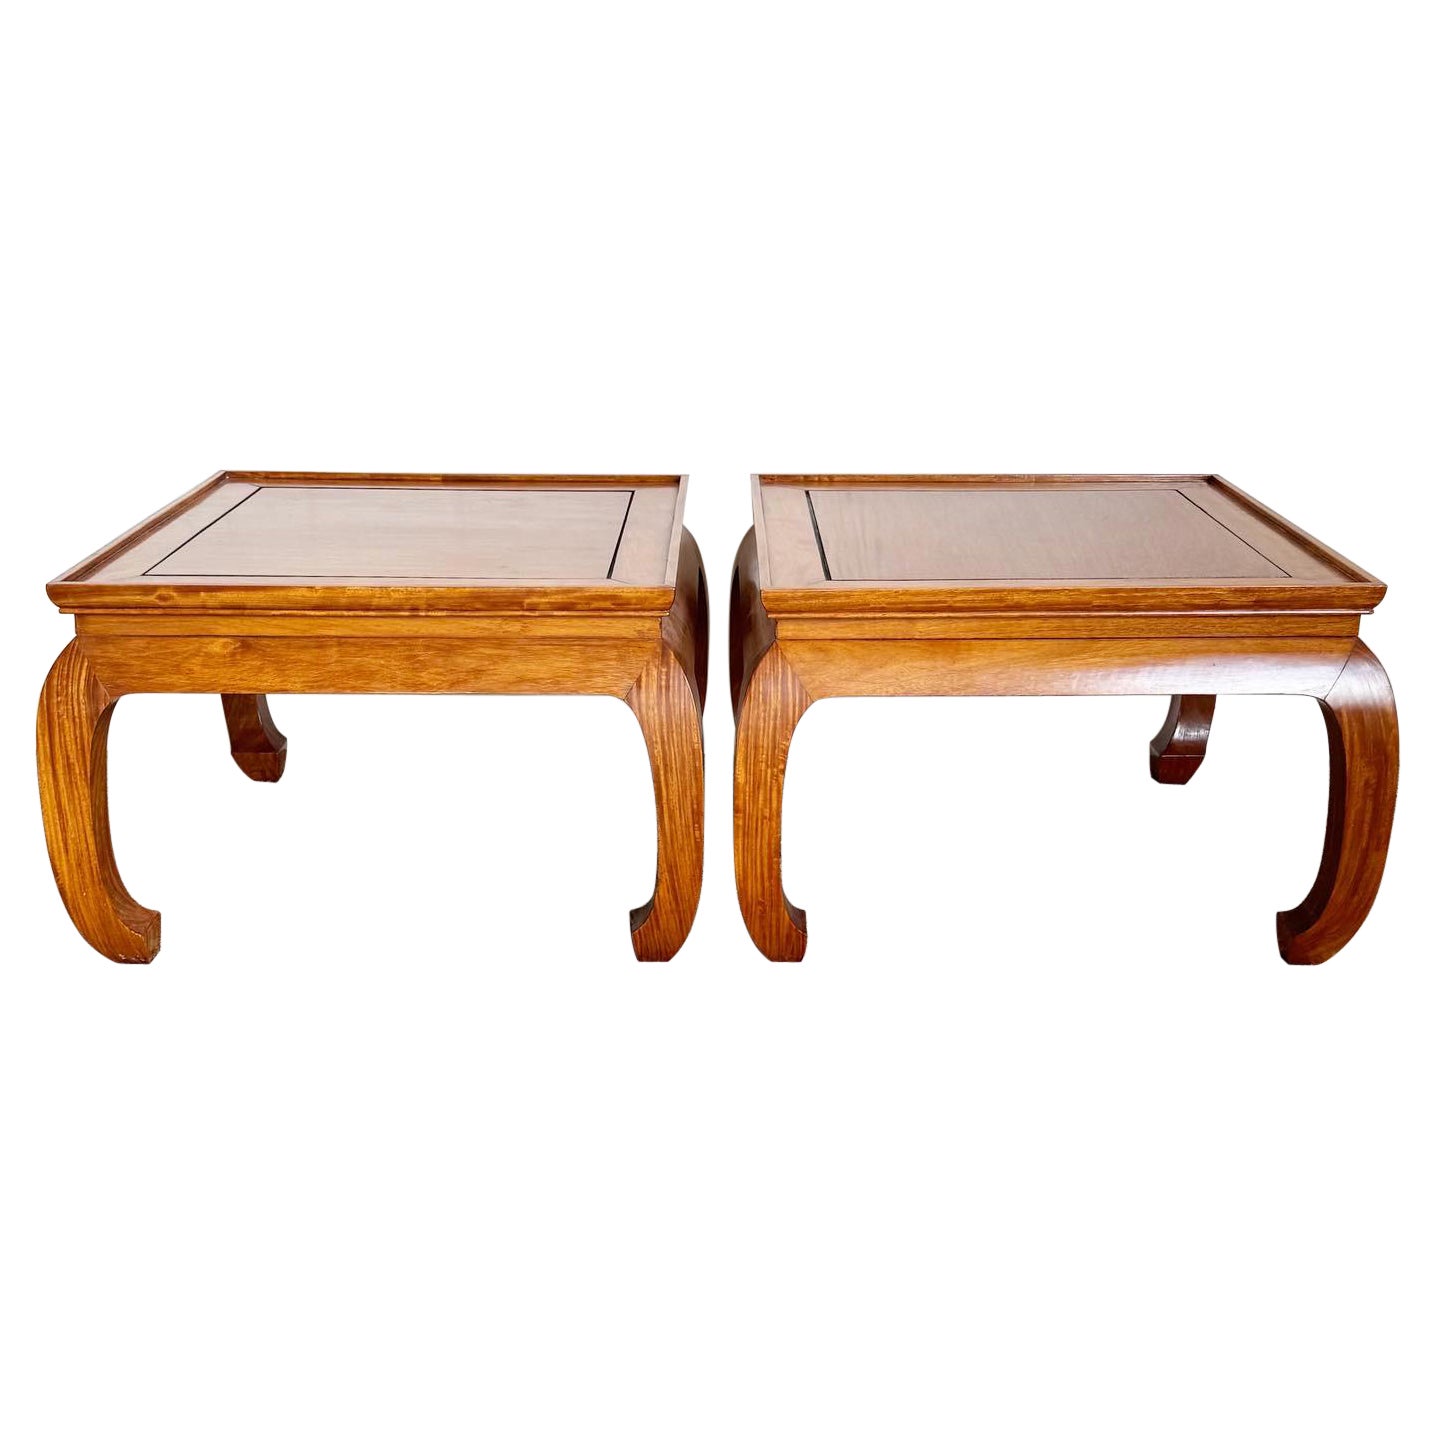 Chinoiserie Ming Style Wooden Side Tables - a Pair For Sale